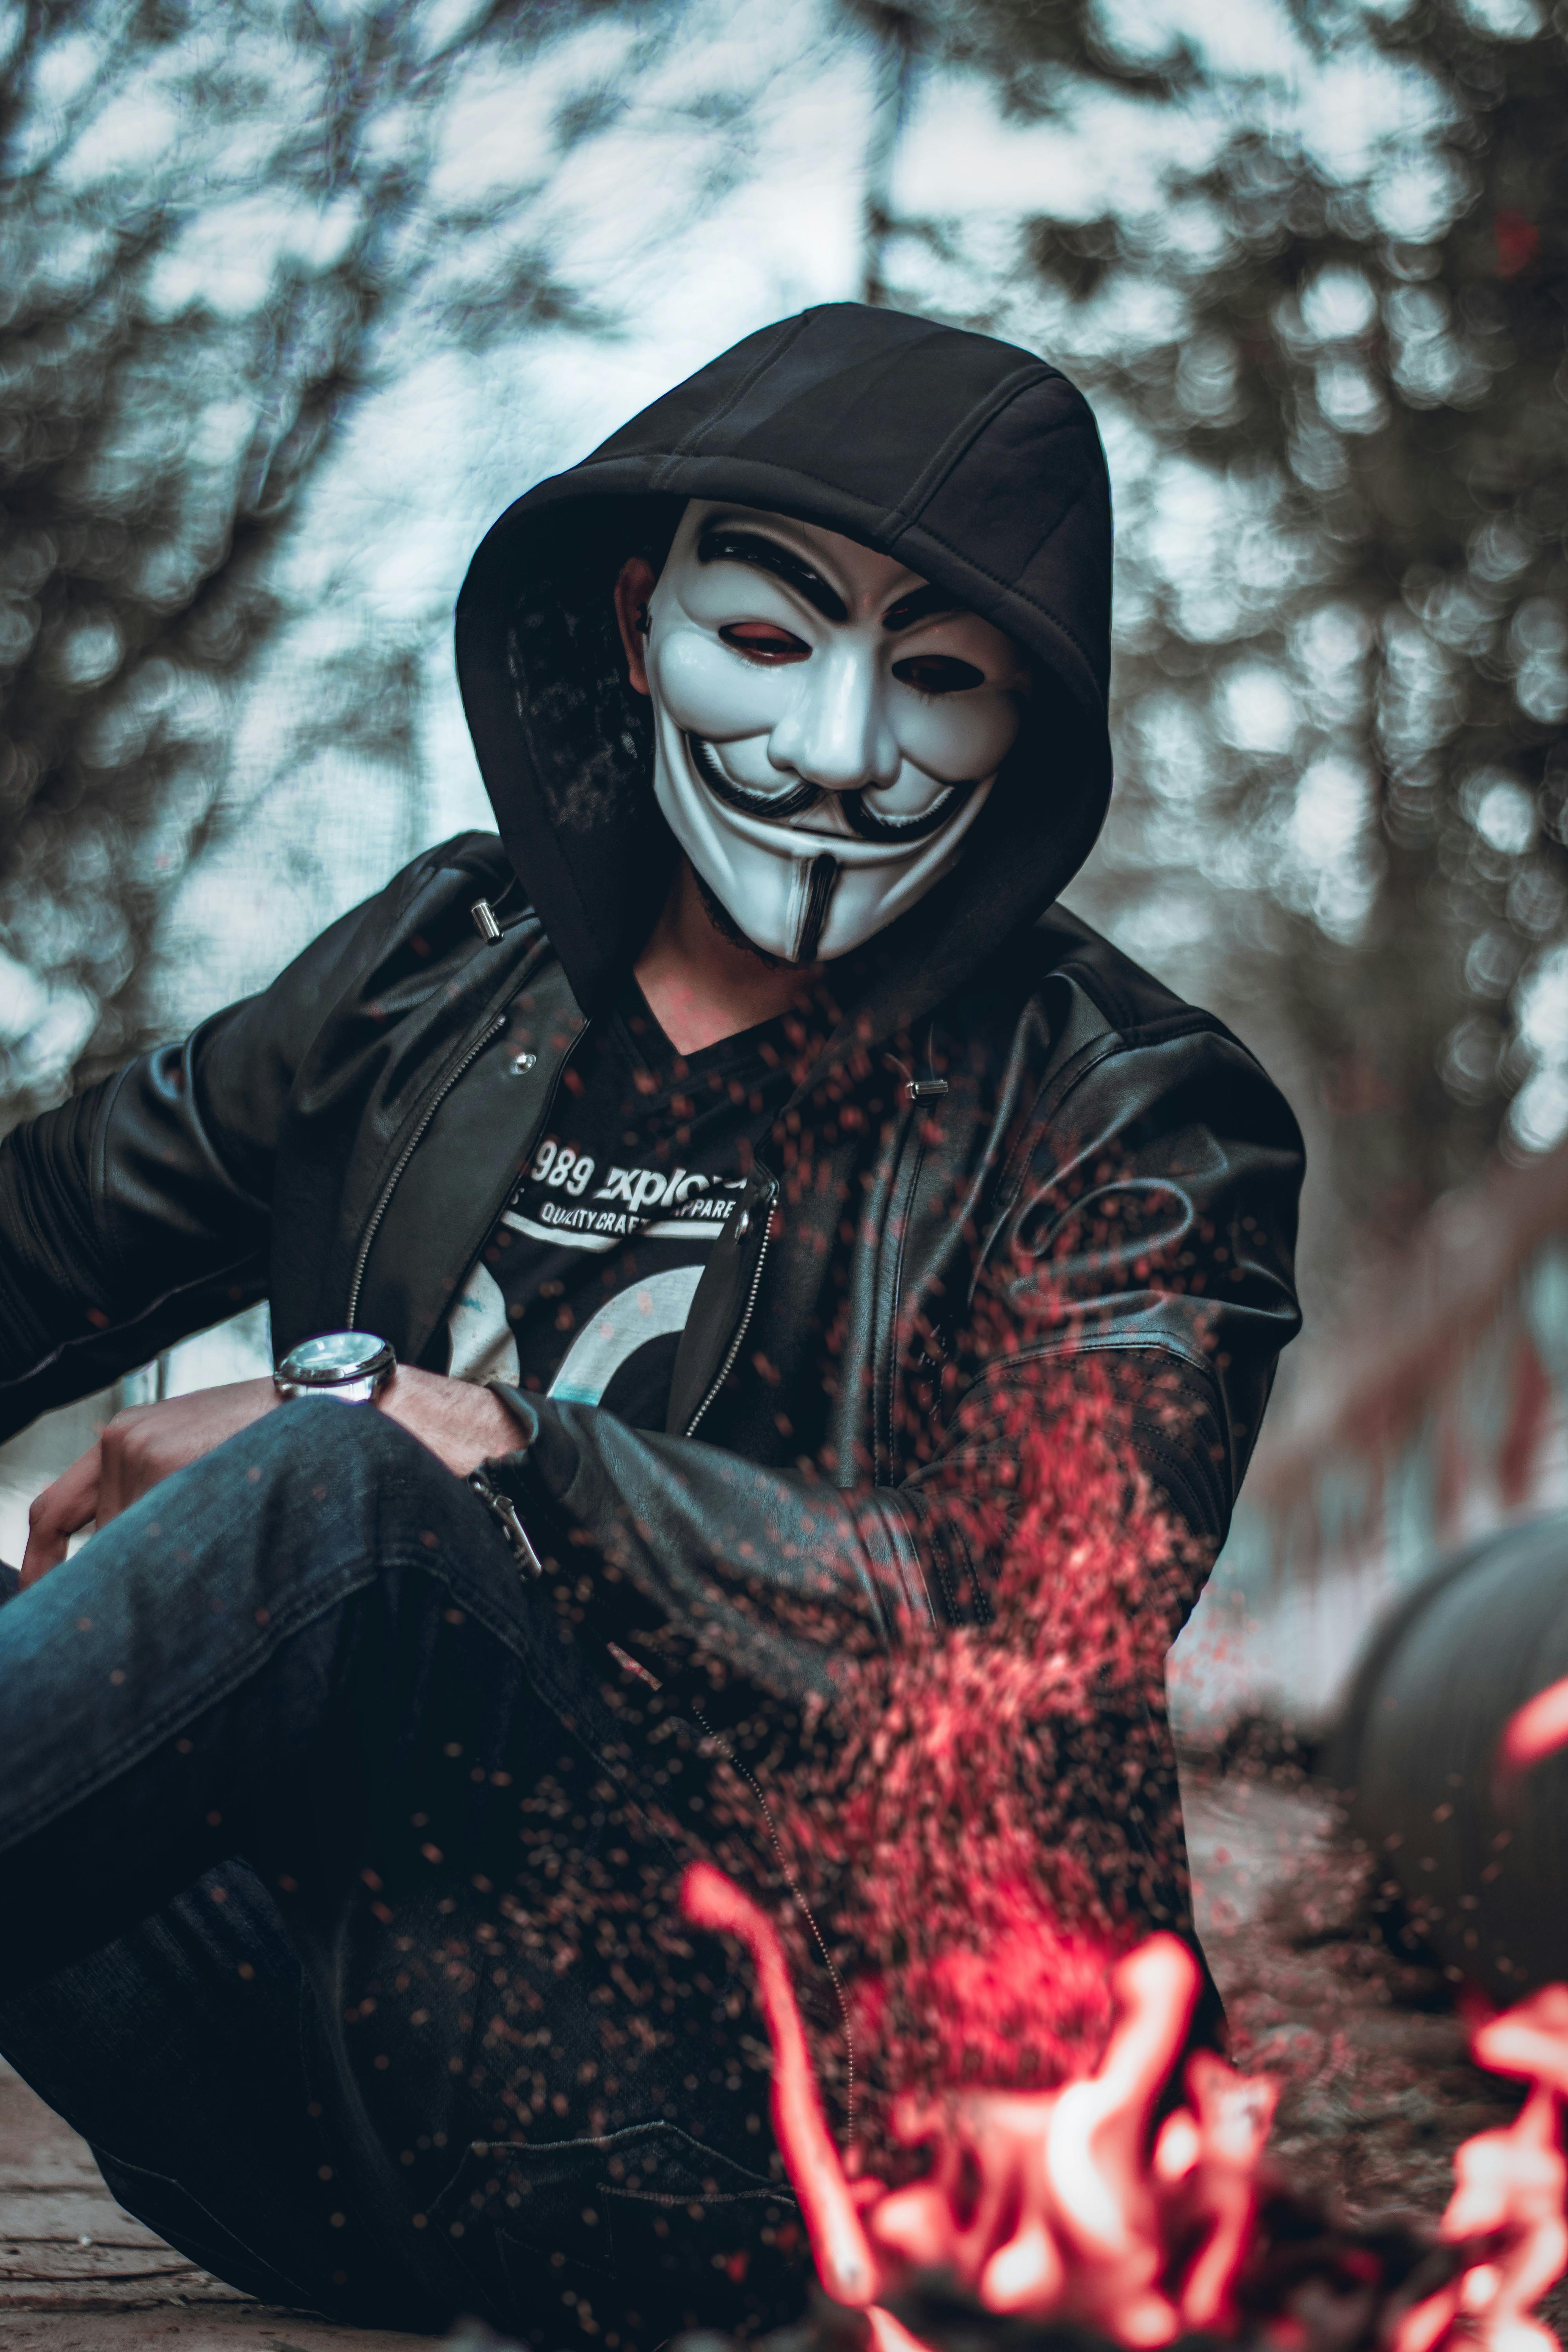 10,000+ Best Mask Images · 100% Free · Pexels Stock